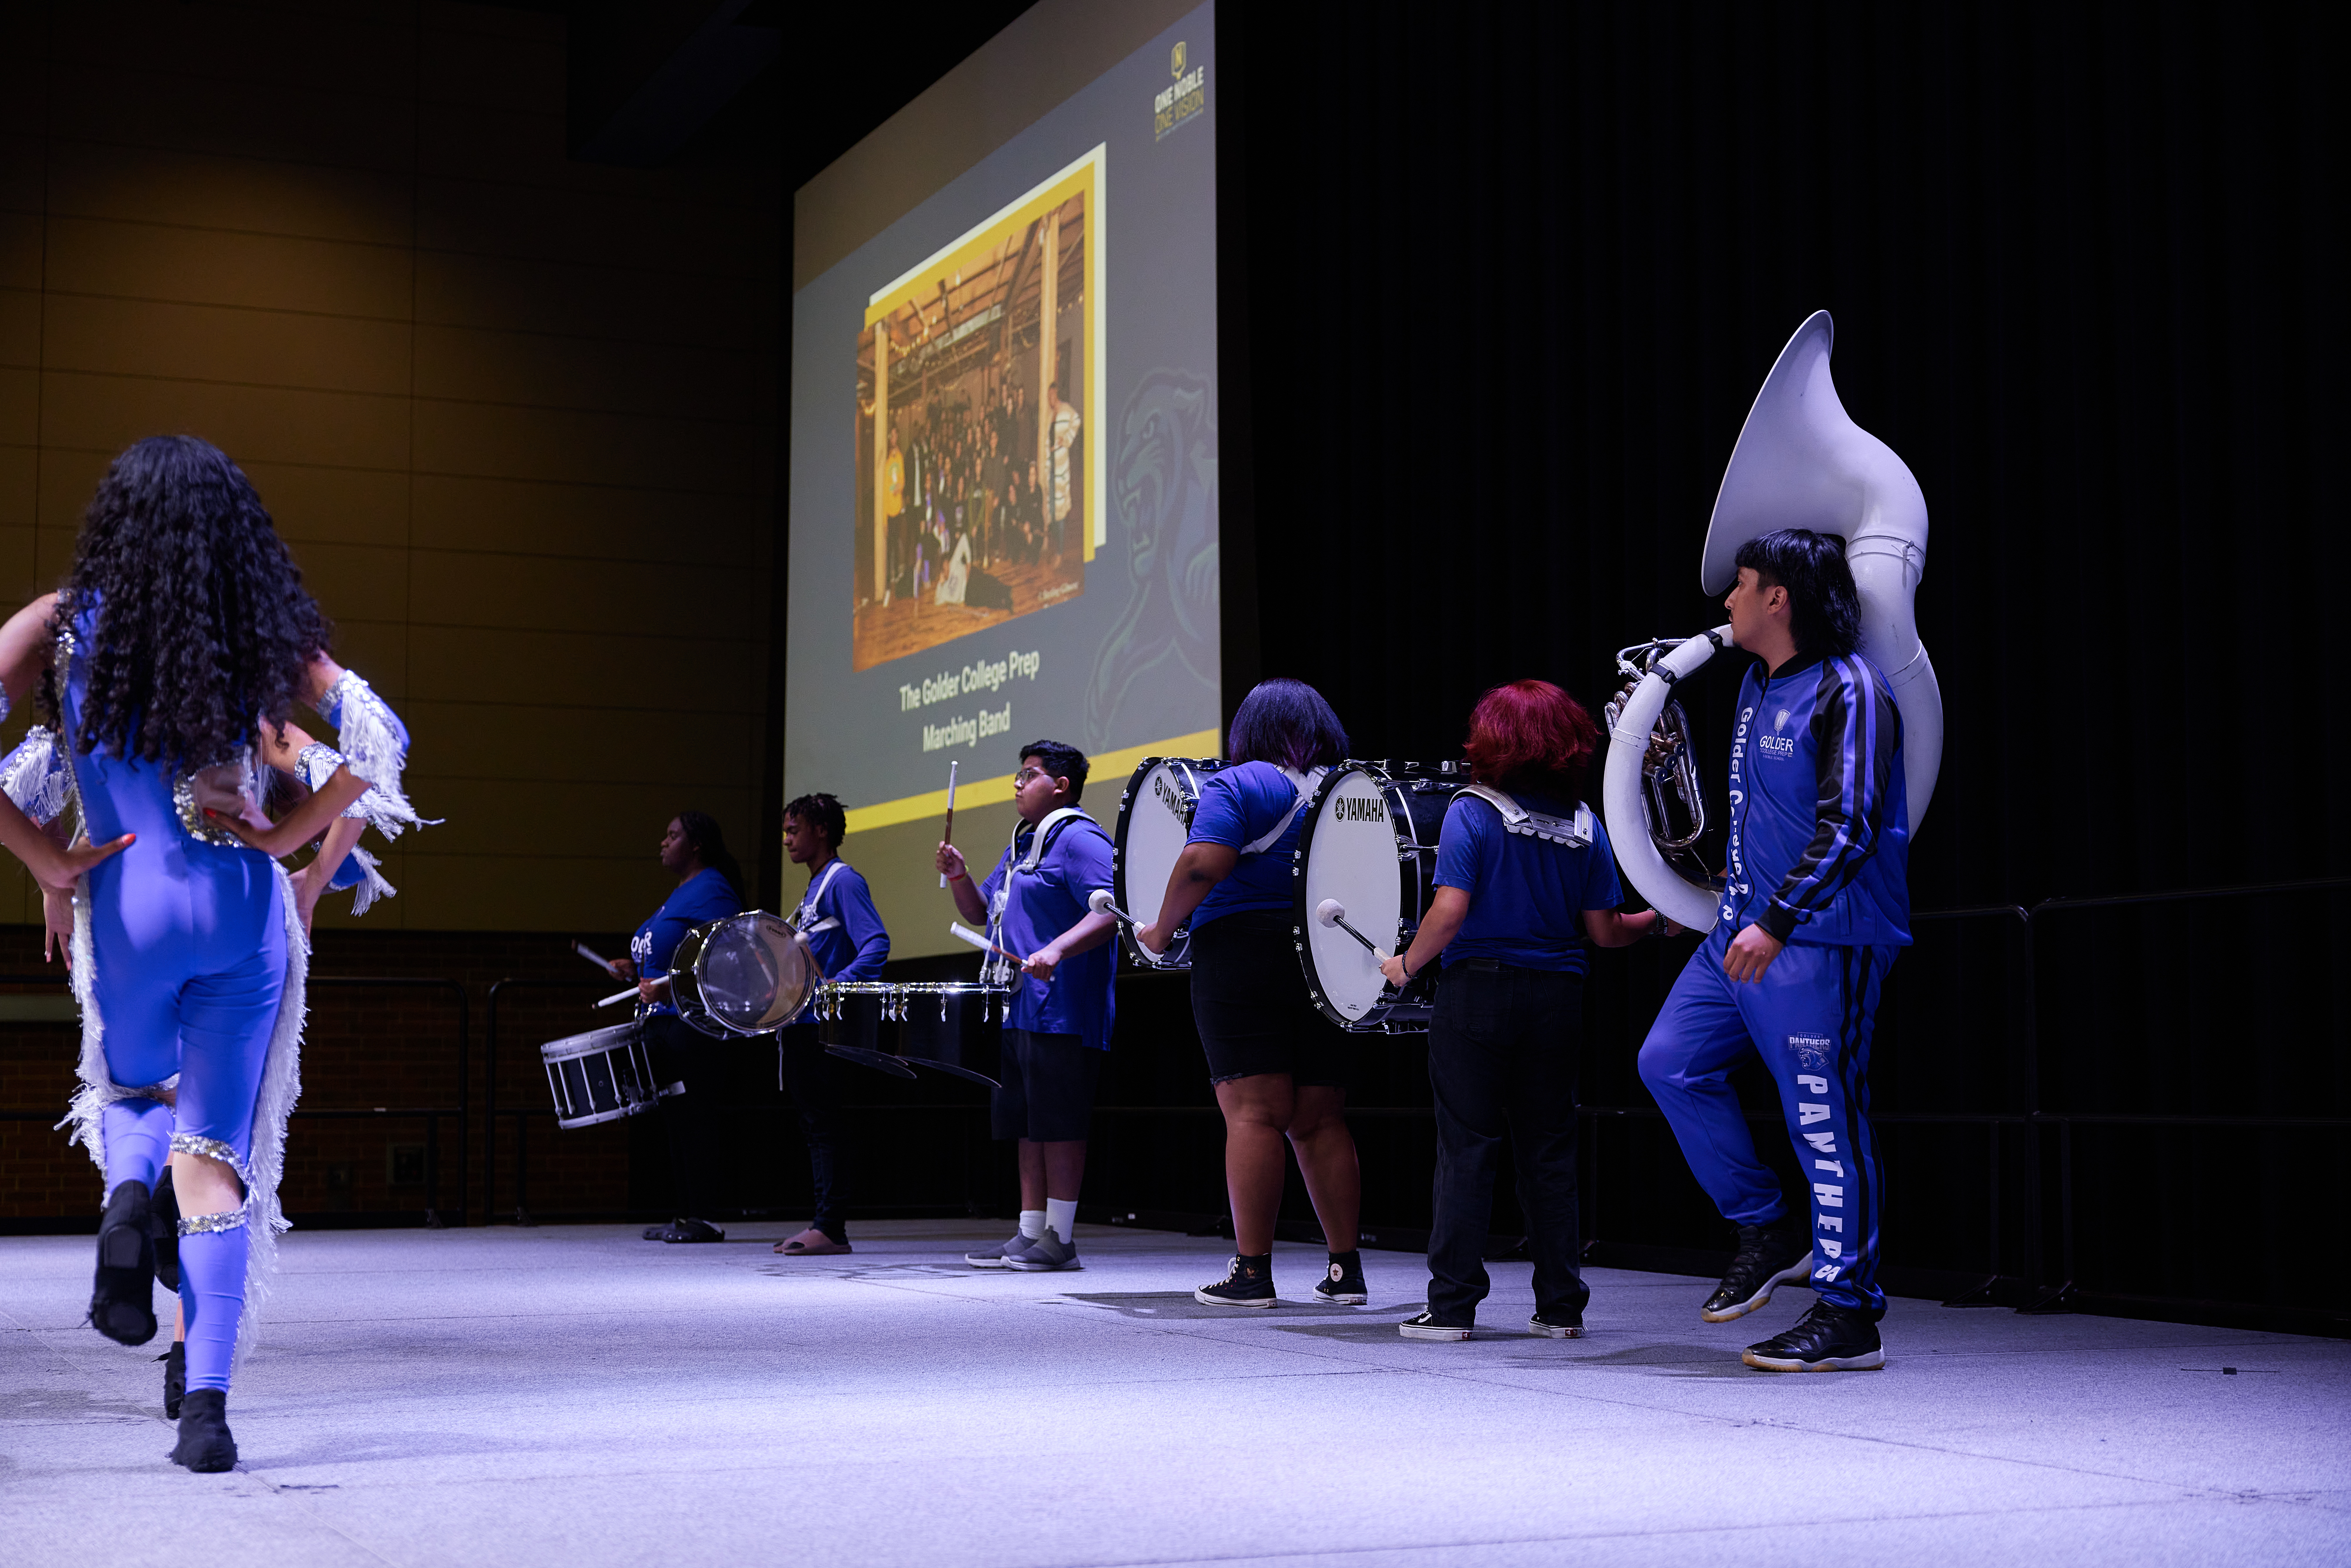 Photo shows the Golder College Prep marching band standing on stage, performing at the Noble School's Staff Kickoff for the 2023-2024 school year. The dancers of the band dance are strutting in the front as a tuba player and multiple drum players play behind them. There is a big projector screen behind them that says "The Golder College Prep Marching Band".